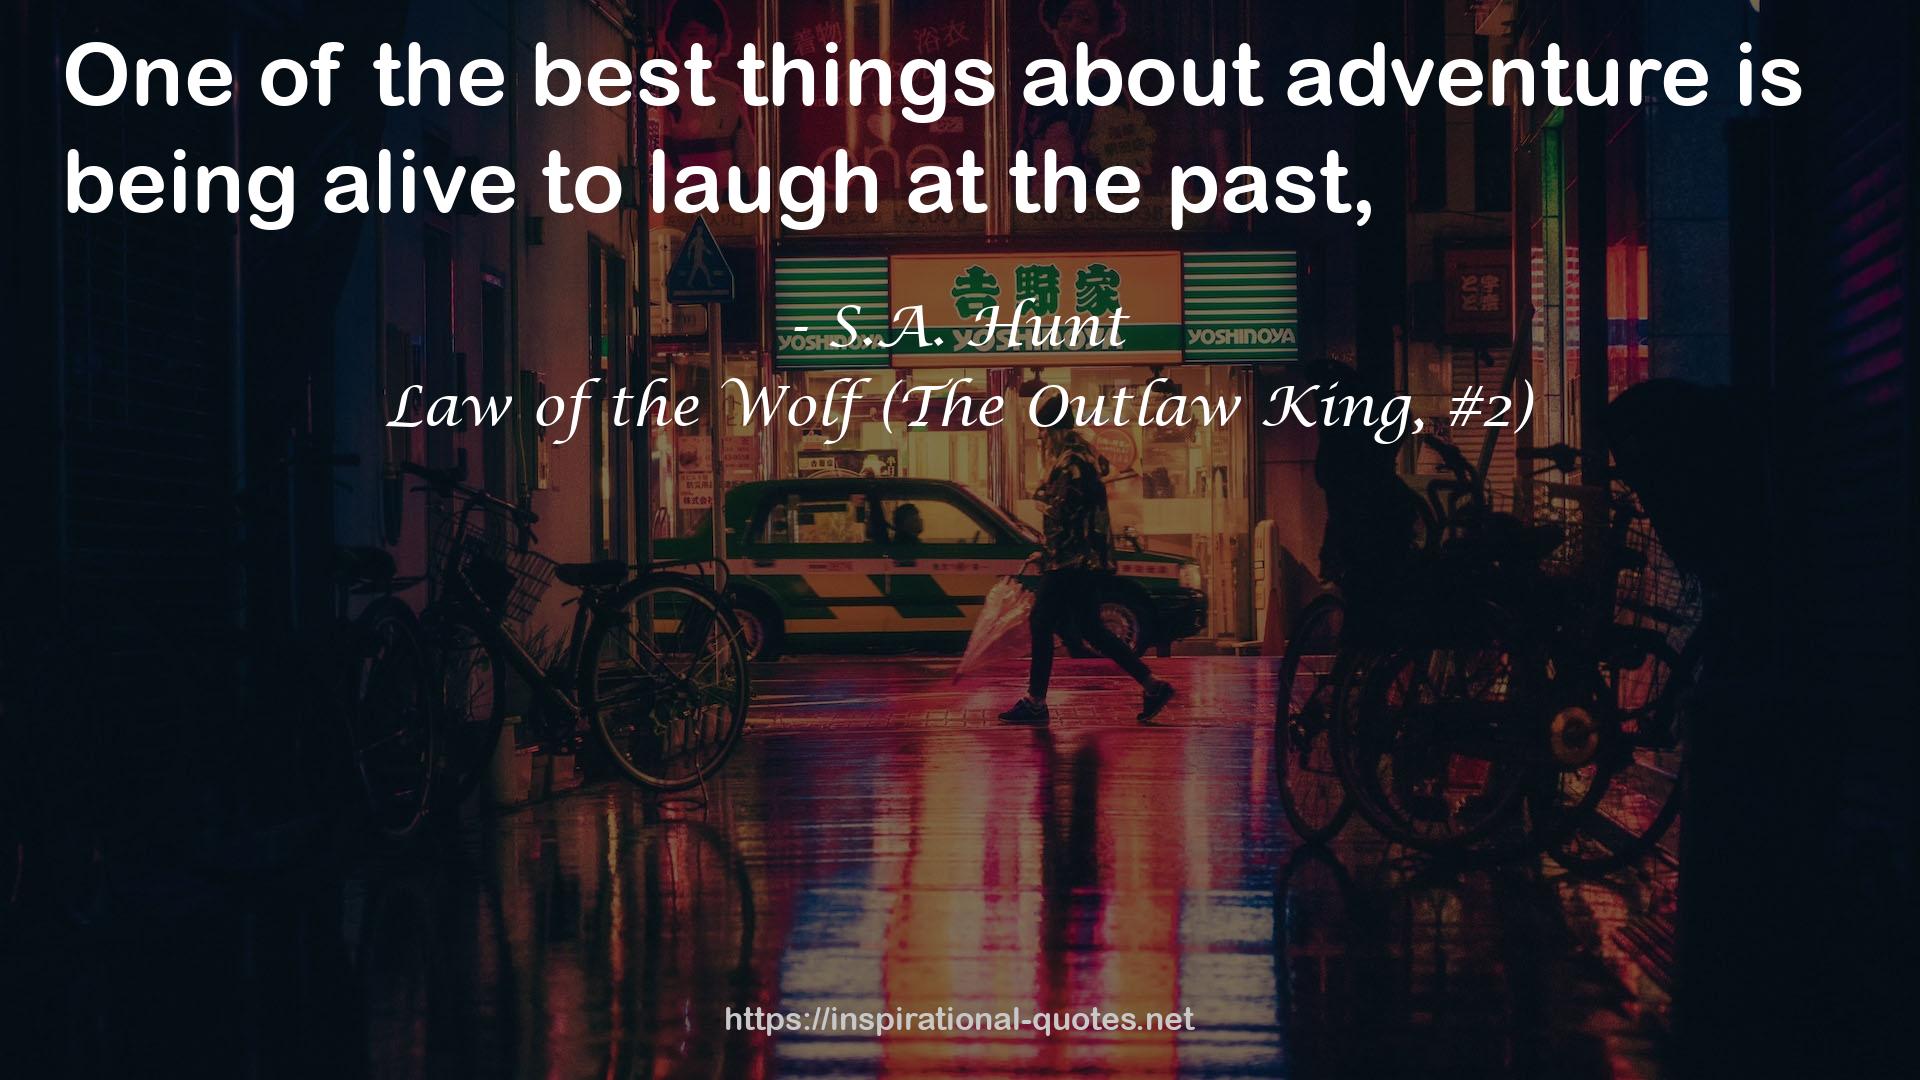 Law of the Wolf (The Outlaw King, #2) QUOTES